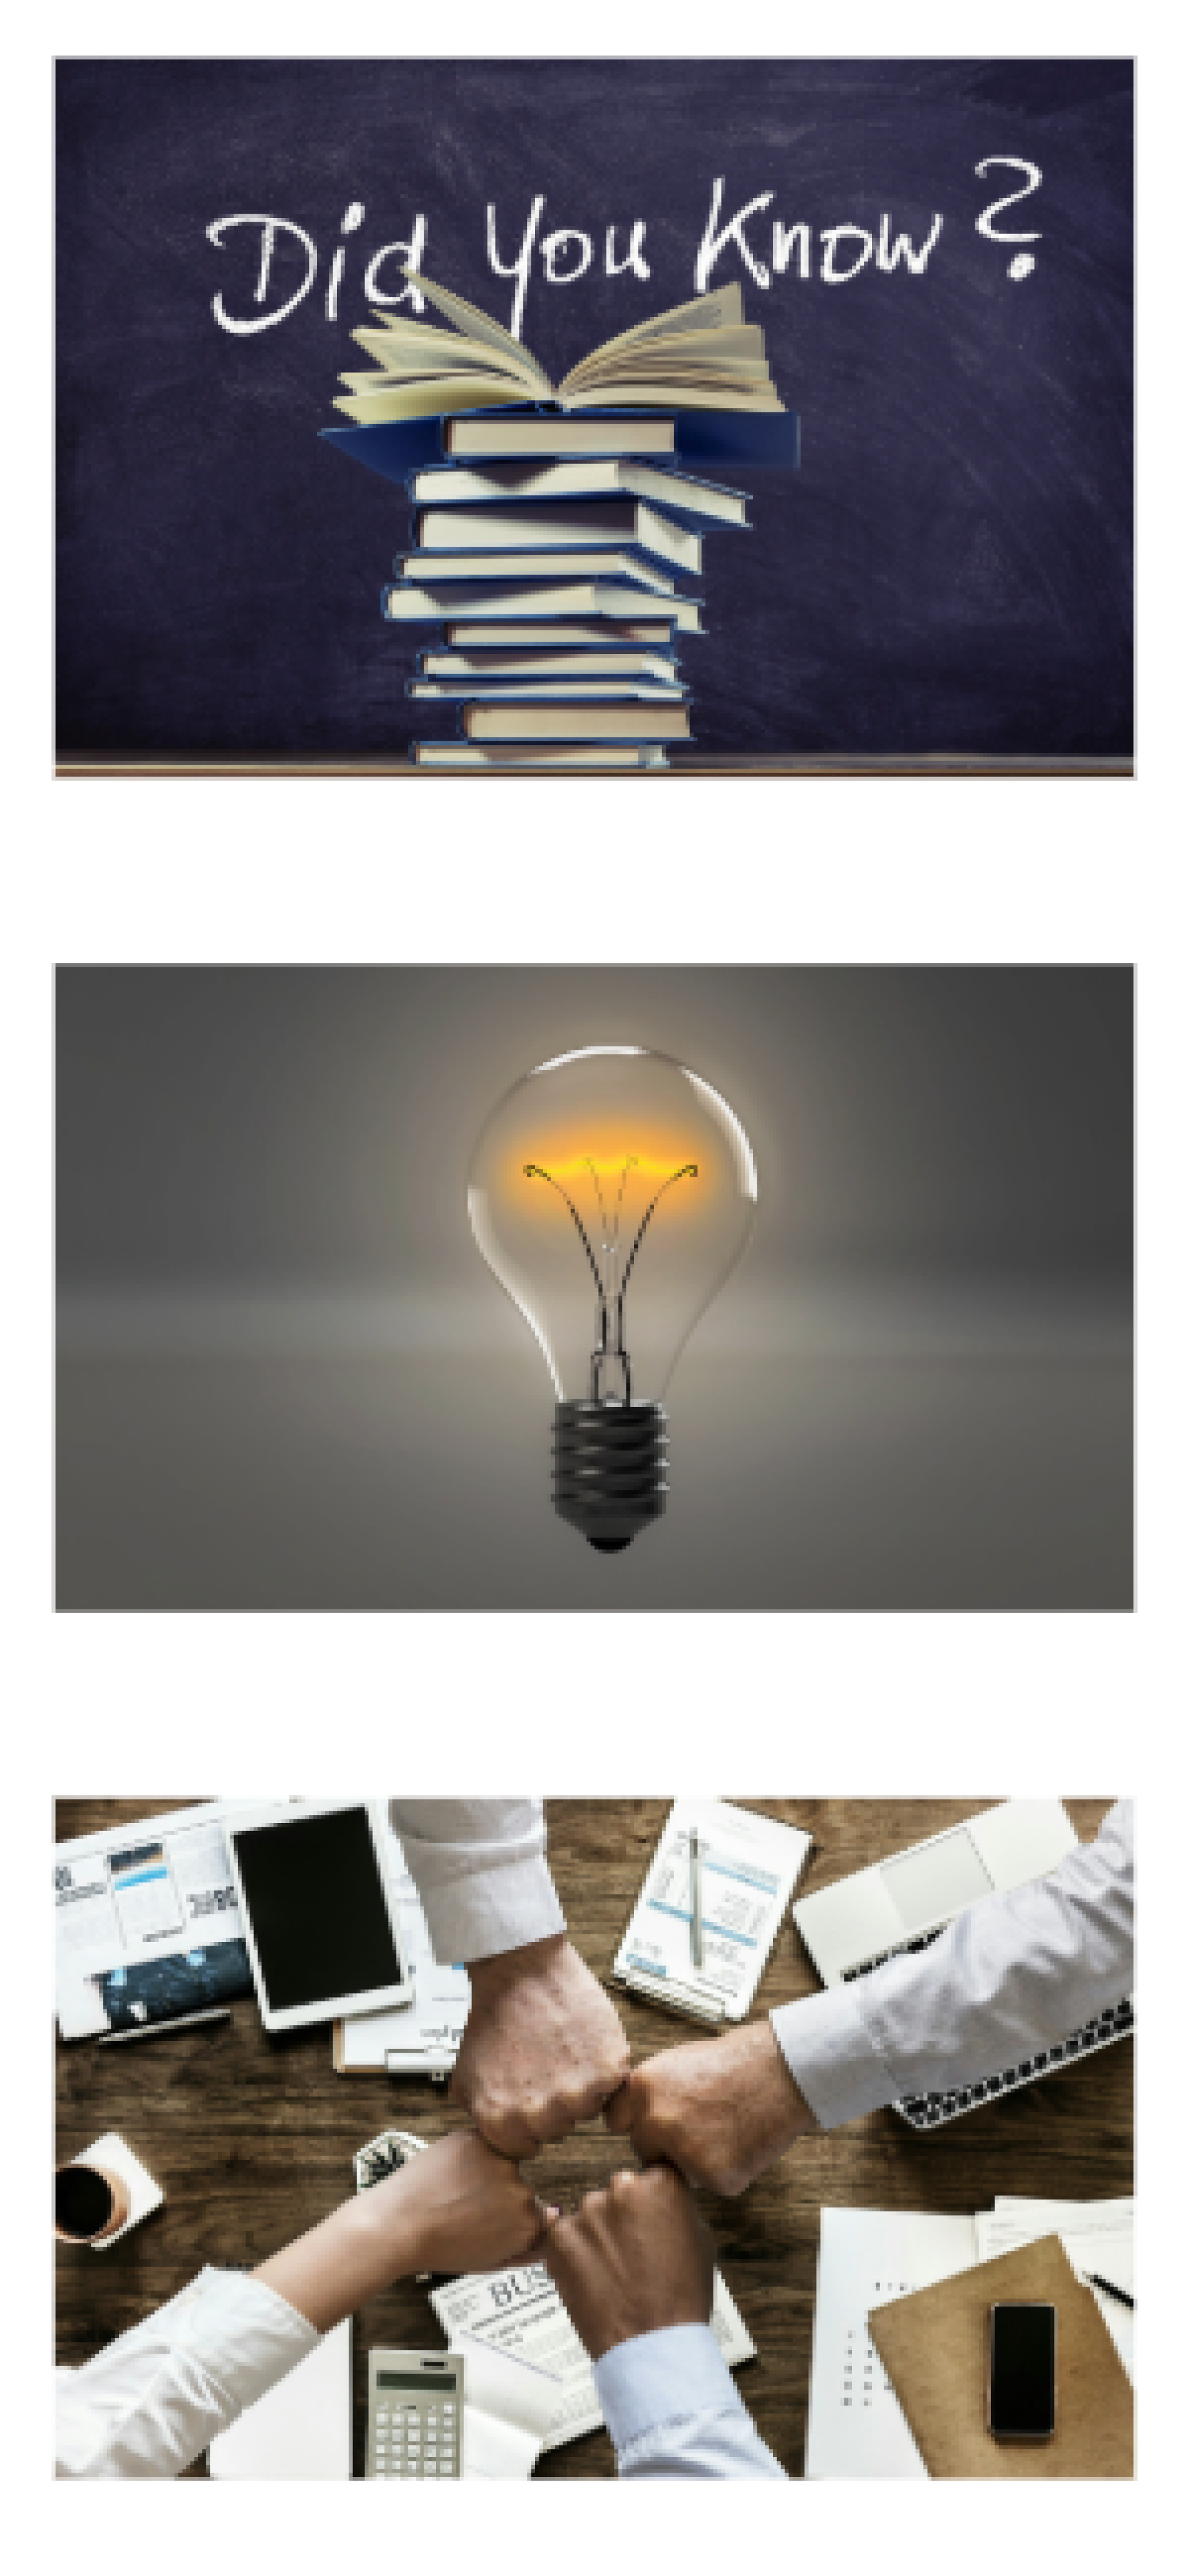 An image of books stacked with the top one open, text says Did You Know. An image of a light bulb that is lit against a dark gray background. And image of four fists meeting in the center in fist-bump fashion over a table covered in business materials.